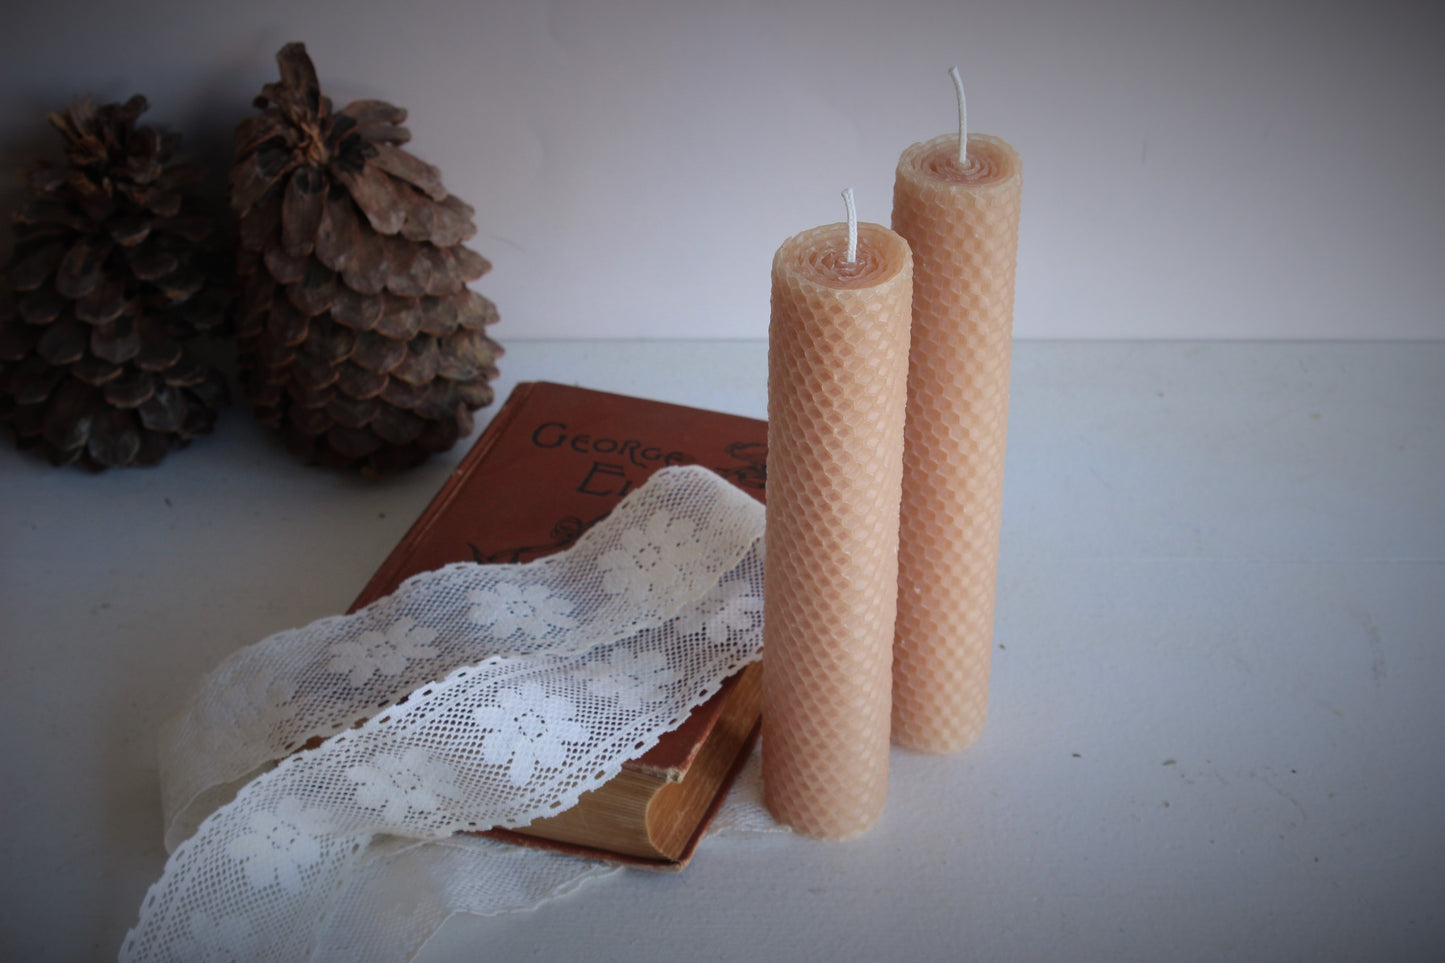 "The Bees Knees" Handmade Beeswax Candle